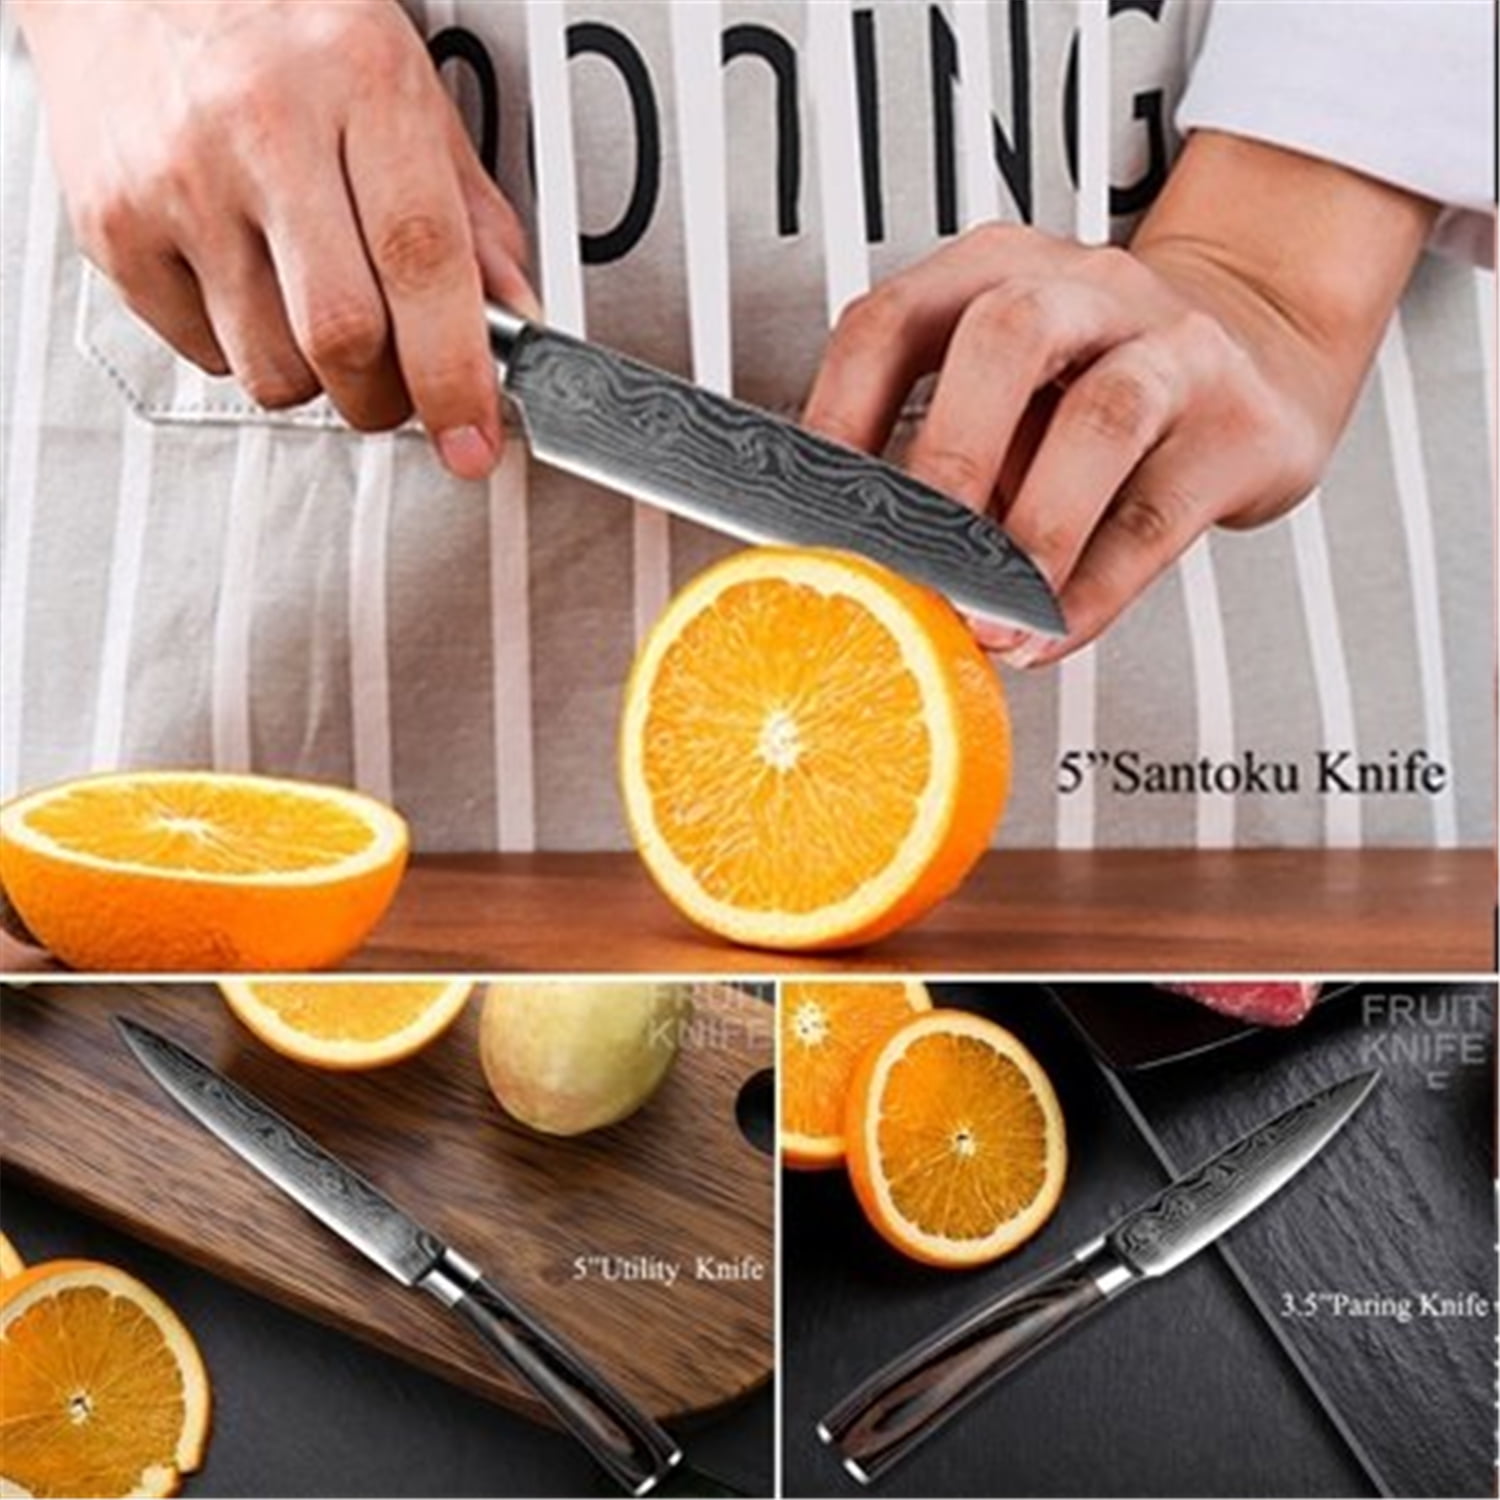 Beijiyi Knife Set with Cutting Board, 5 Pieces, Sharp Santoku and Utility  Knives with Blade Covers and Plastic Chopping Block, Kitchen Cooking  Accessories